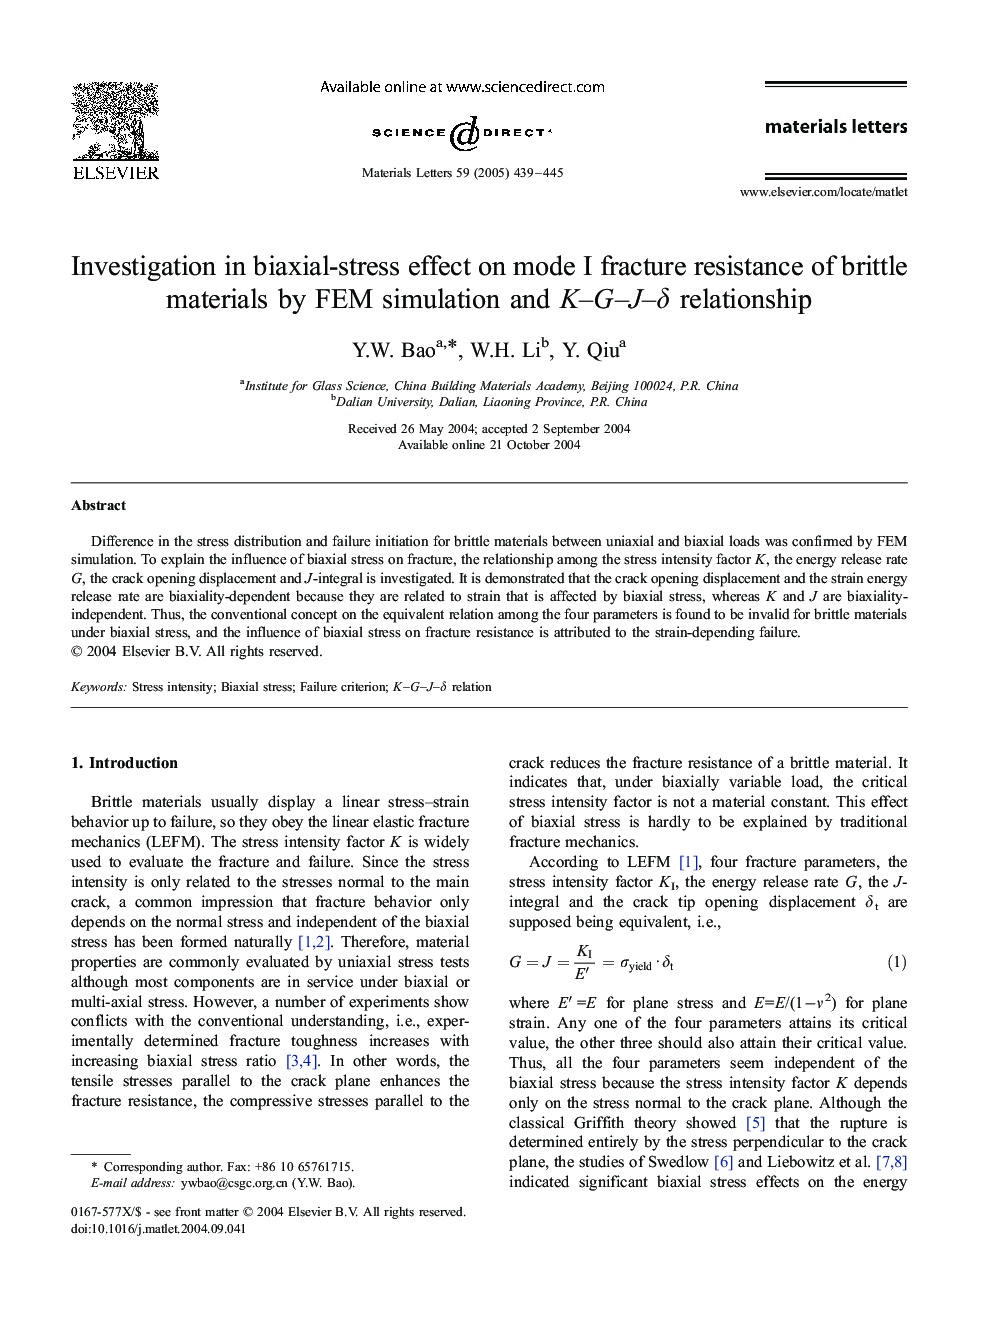 Investigation in biaxial-stress effect on mode I fracture resistance of brittle materials by FEM simulation and K-G-J-Î´ relationship